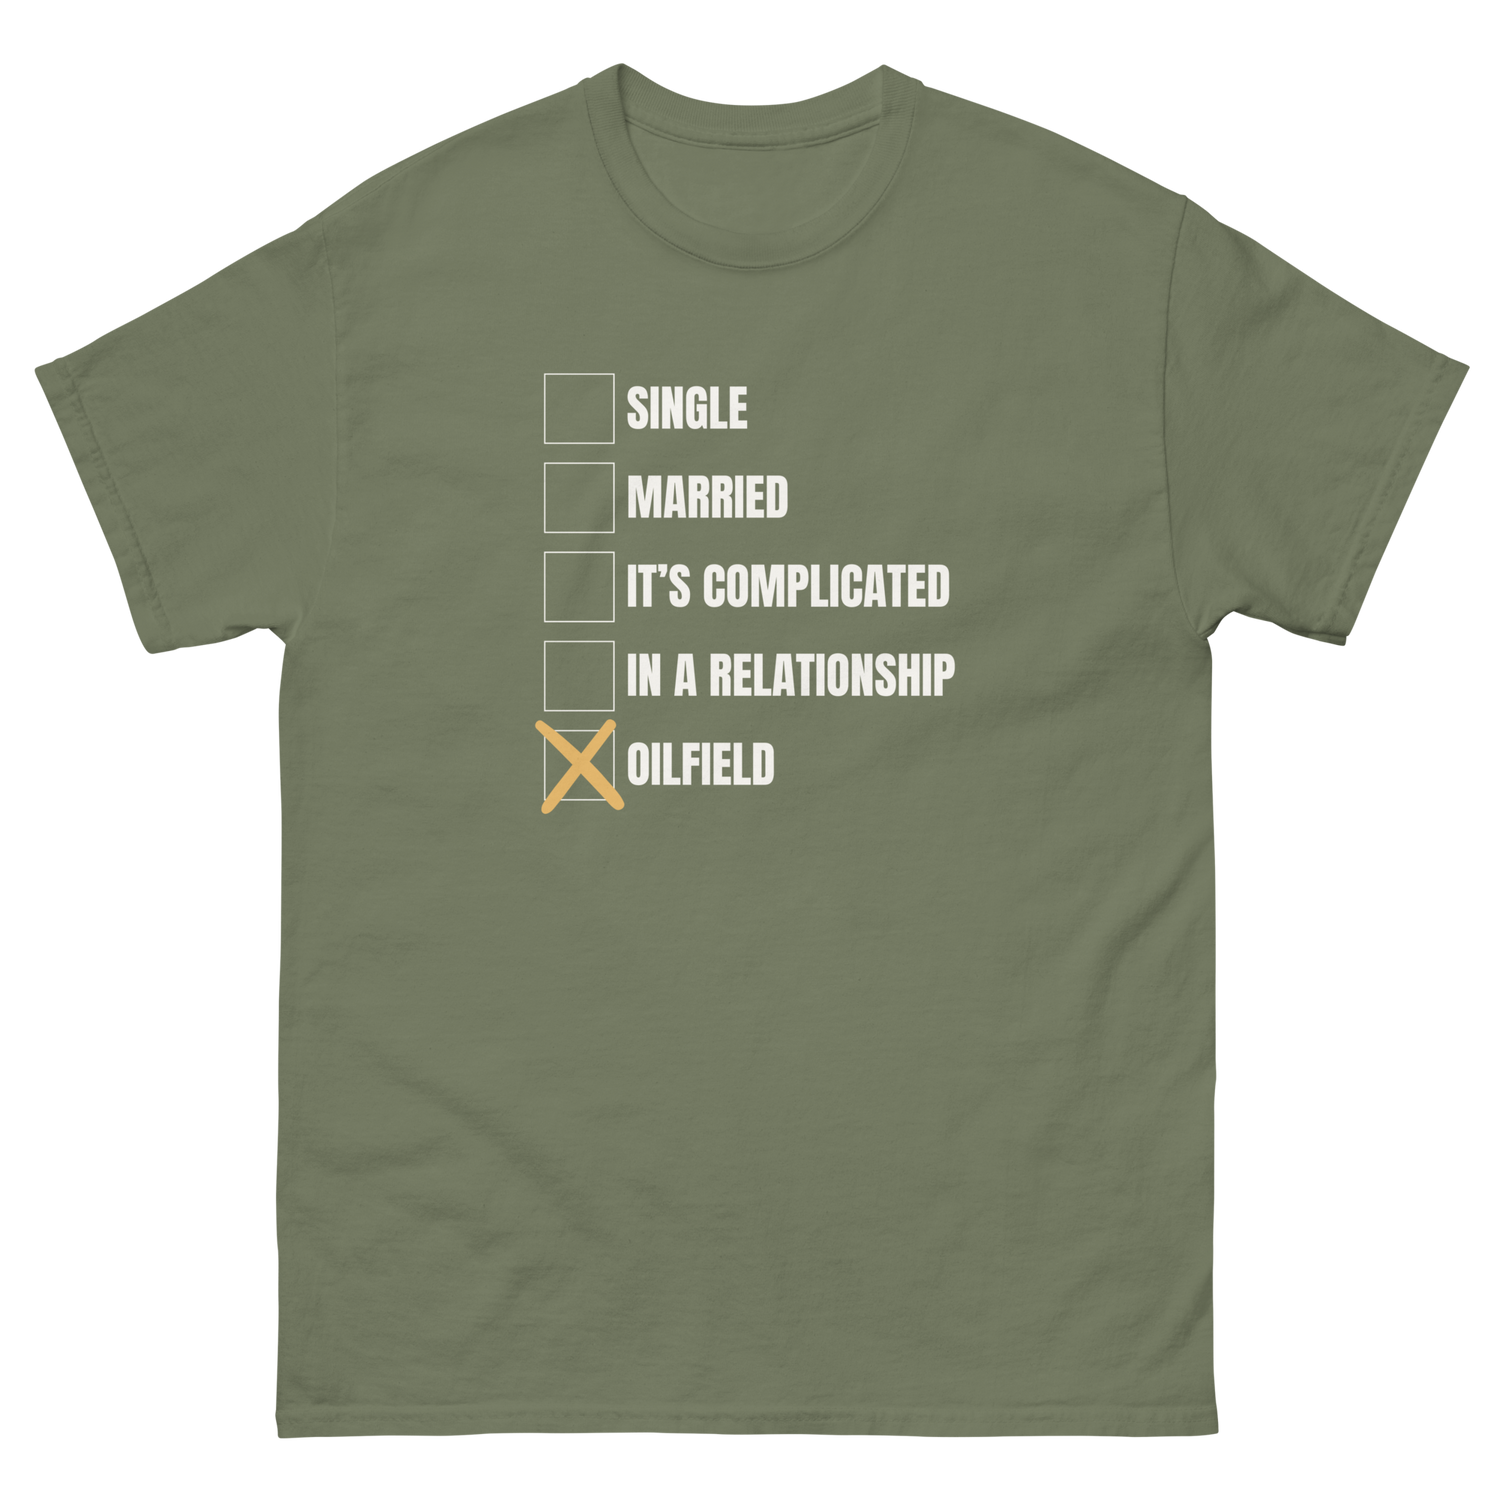 It's Complicated - Classic Tee